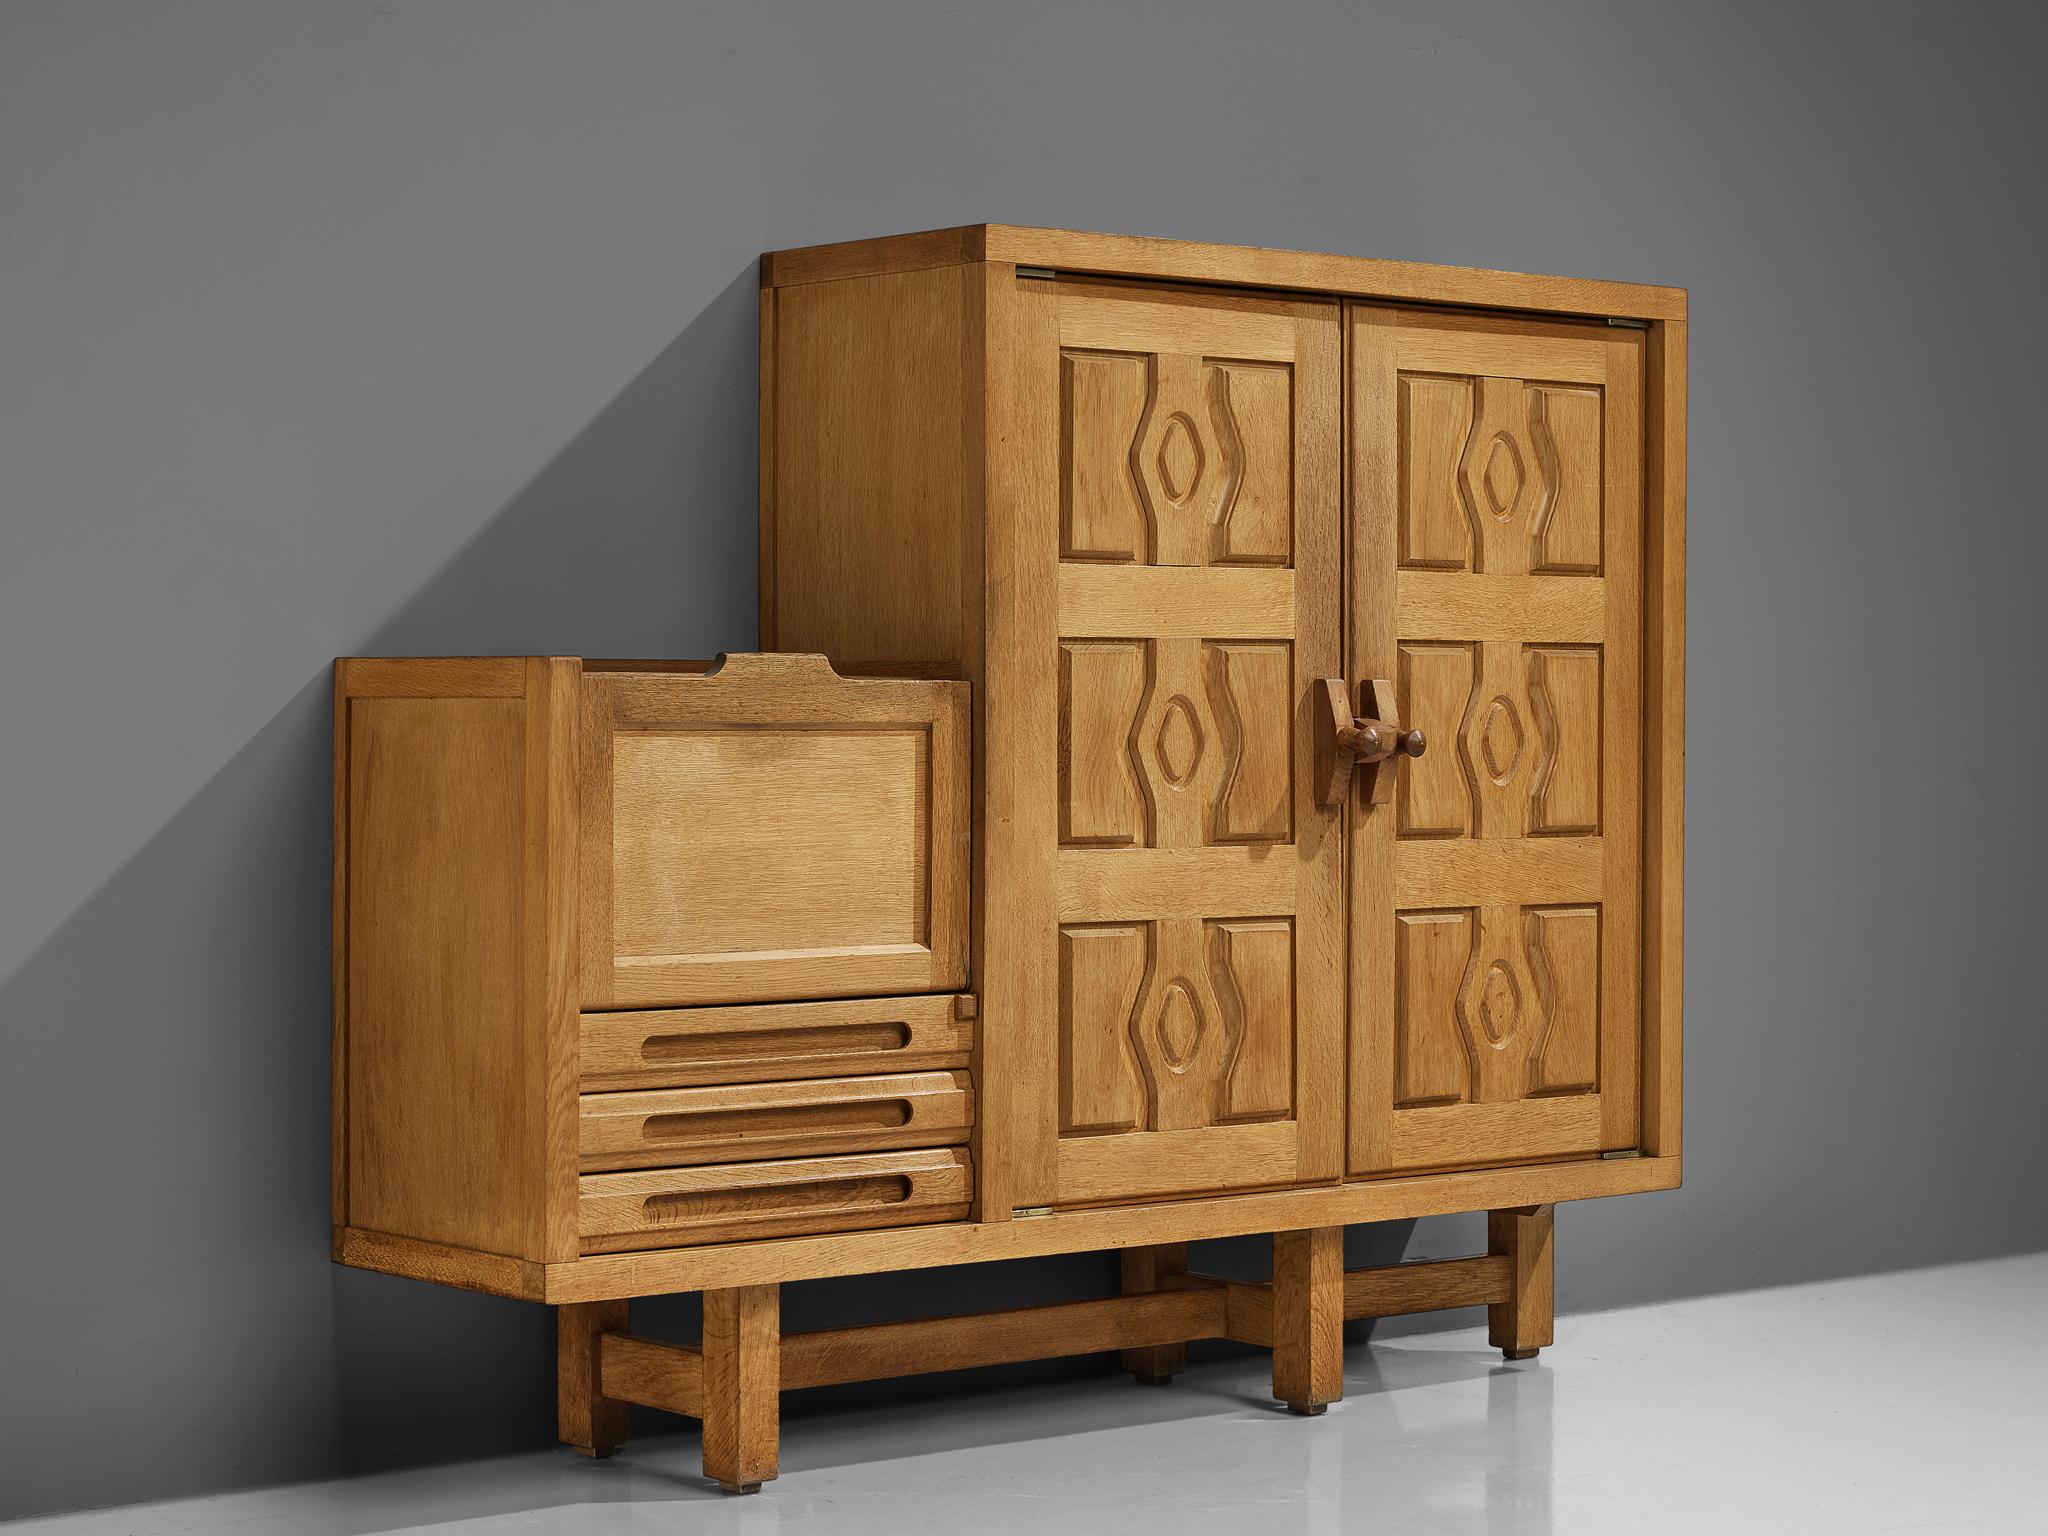 Guillerme and Chambron, cabinet, model 'Thierry', oak, ceramic, France, 1960s

This model 'Thierry' case piece is created by Guillerme and Chambron. The design is characterized by a sophisticated composition created by means of the arrangement of